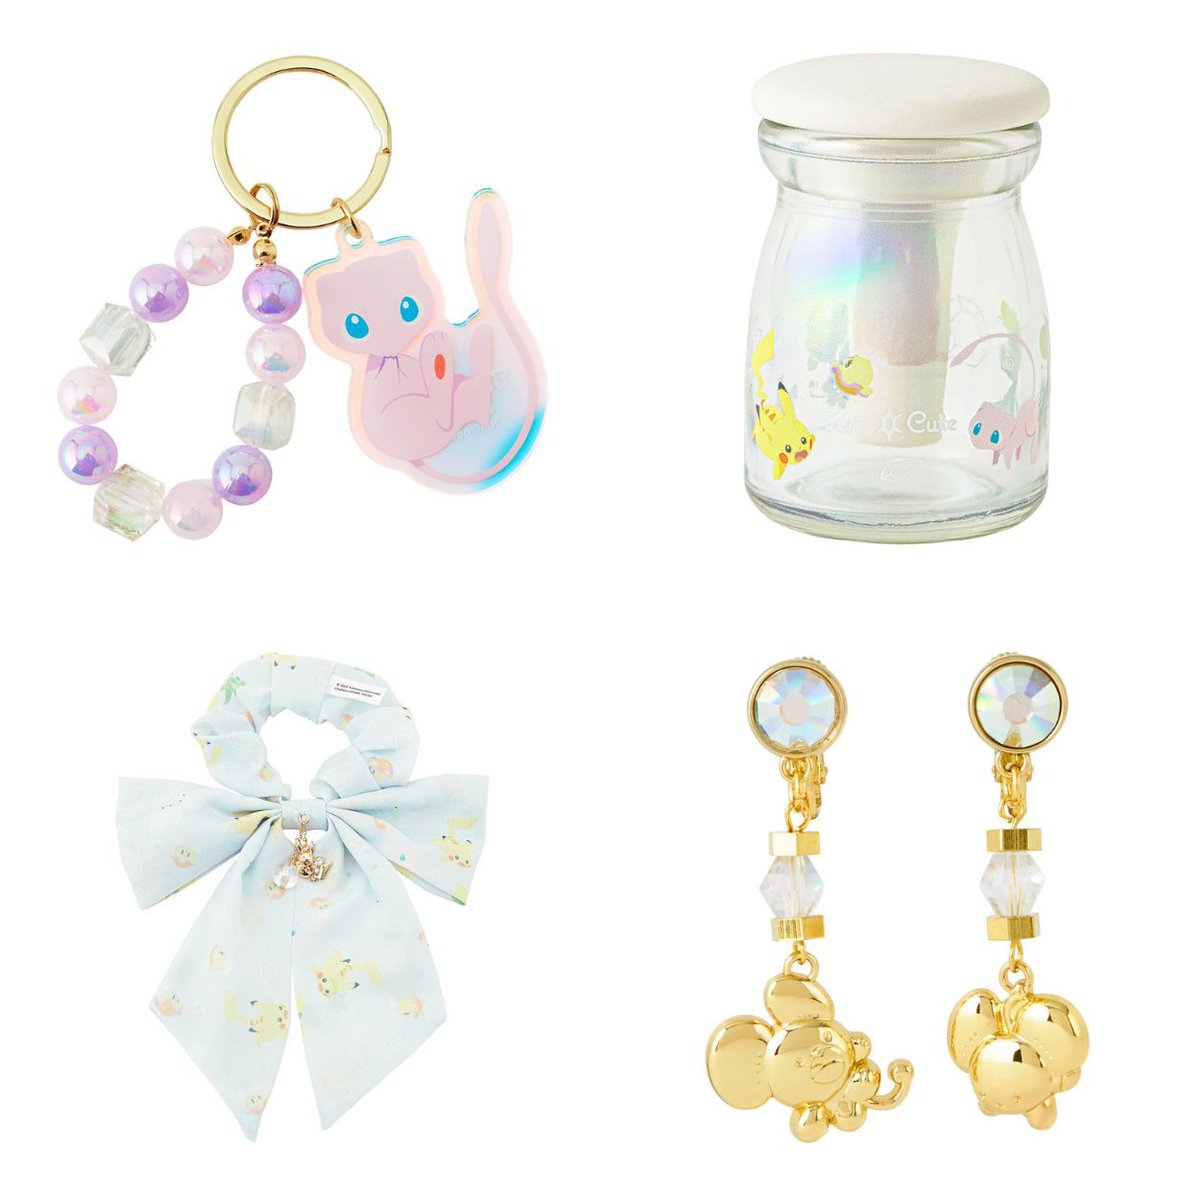 Pokémon TeraCute ✨ Keychains, Earrings & more. Check them out at the link below! 🛑buff.ly/3xW3s8B #Pokemon #Mew